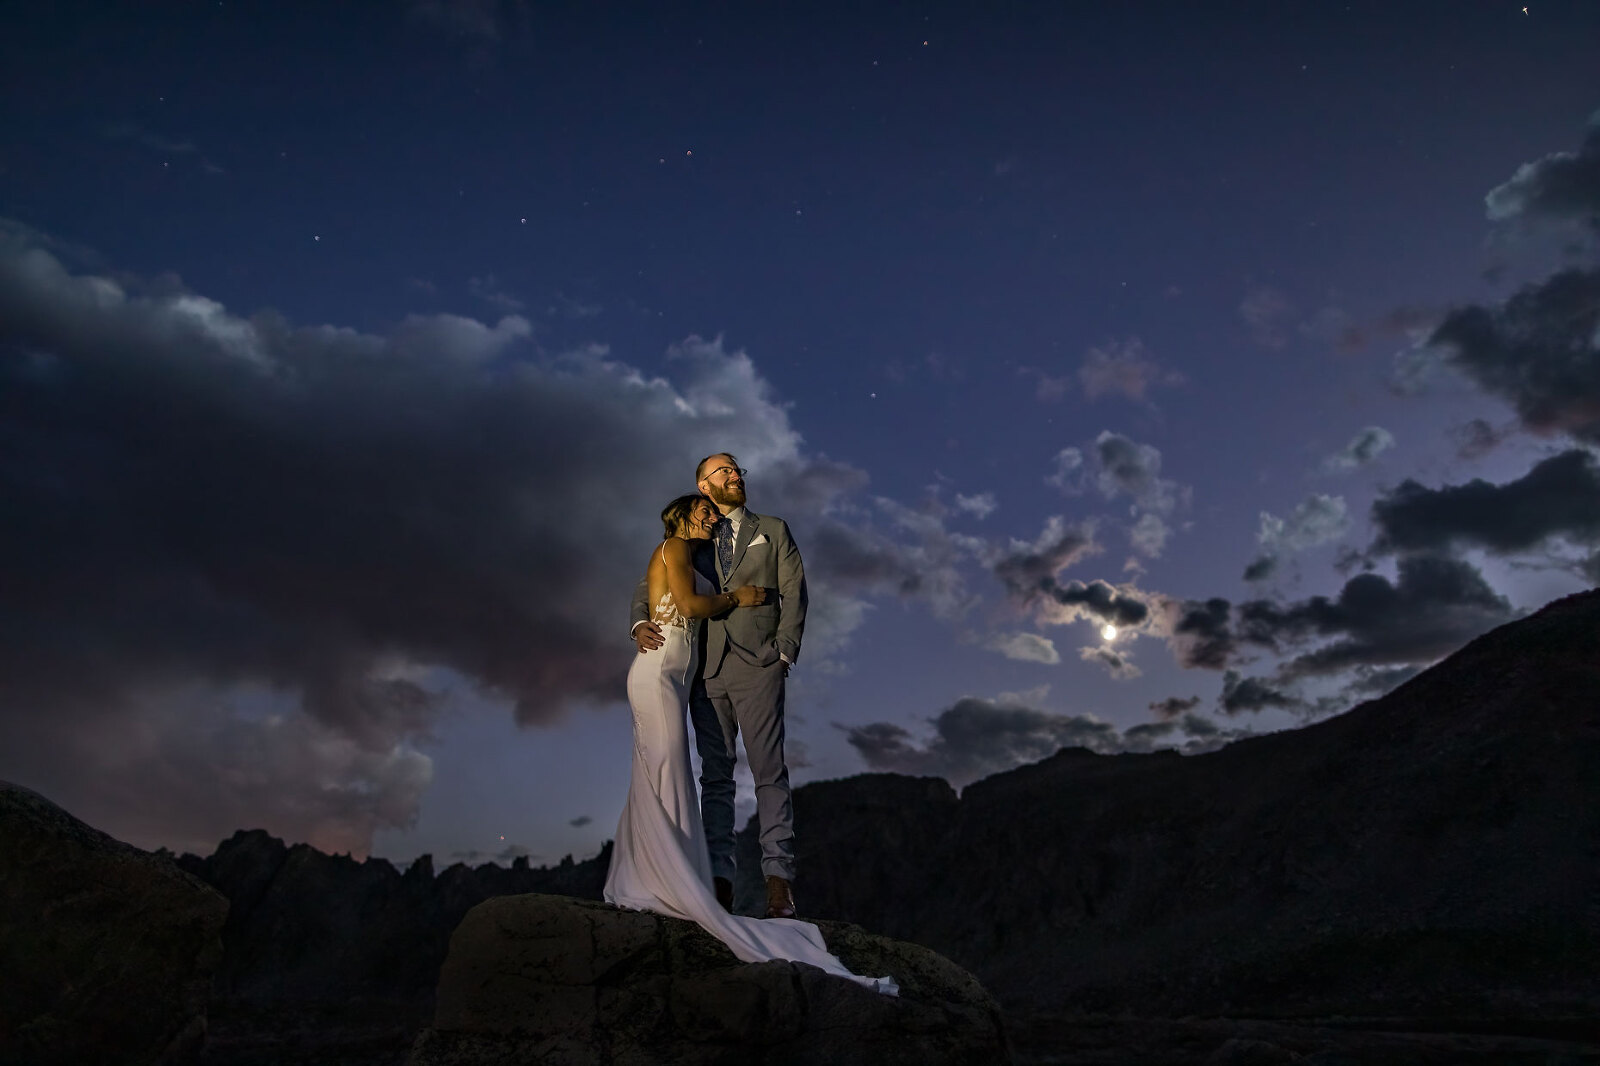 Wedding photo of bride and groom under the moon and stars.